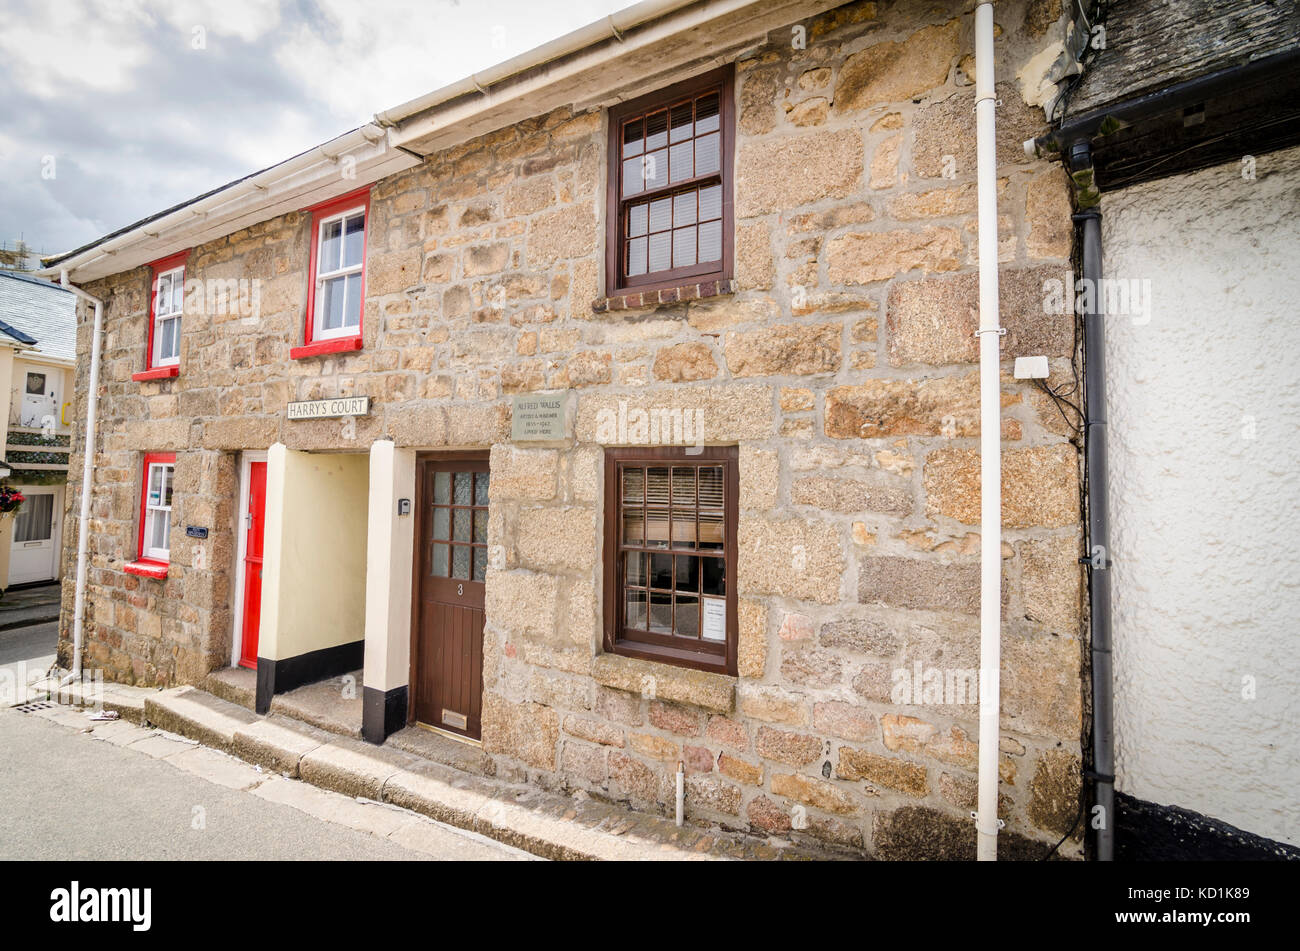 Former home of Alfred Wallis, artist and painter, Harry's Court, St Ives, Cornwall, England, UK Stock Photo